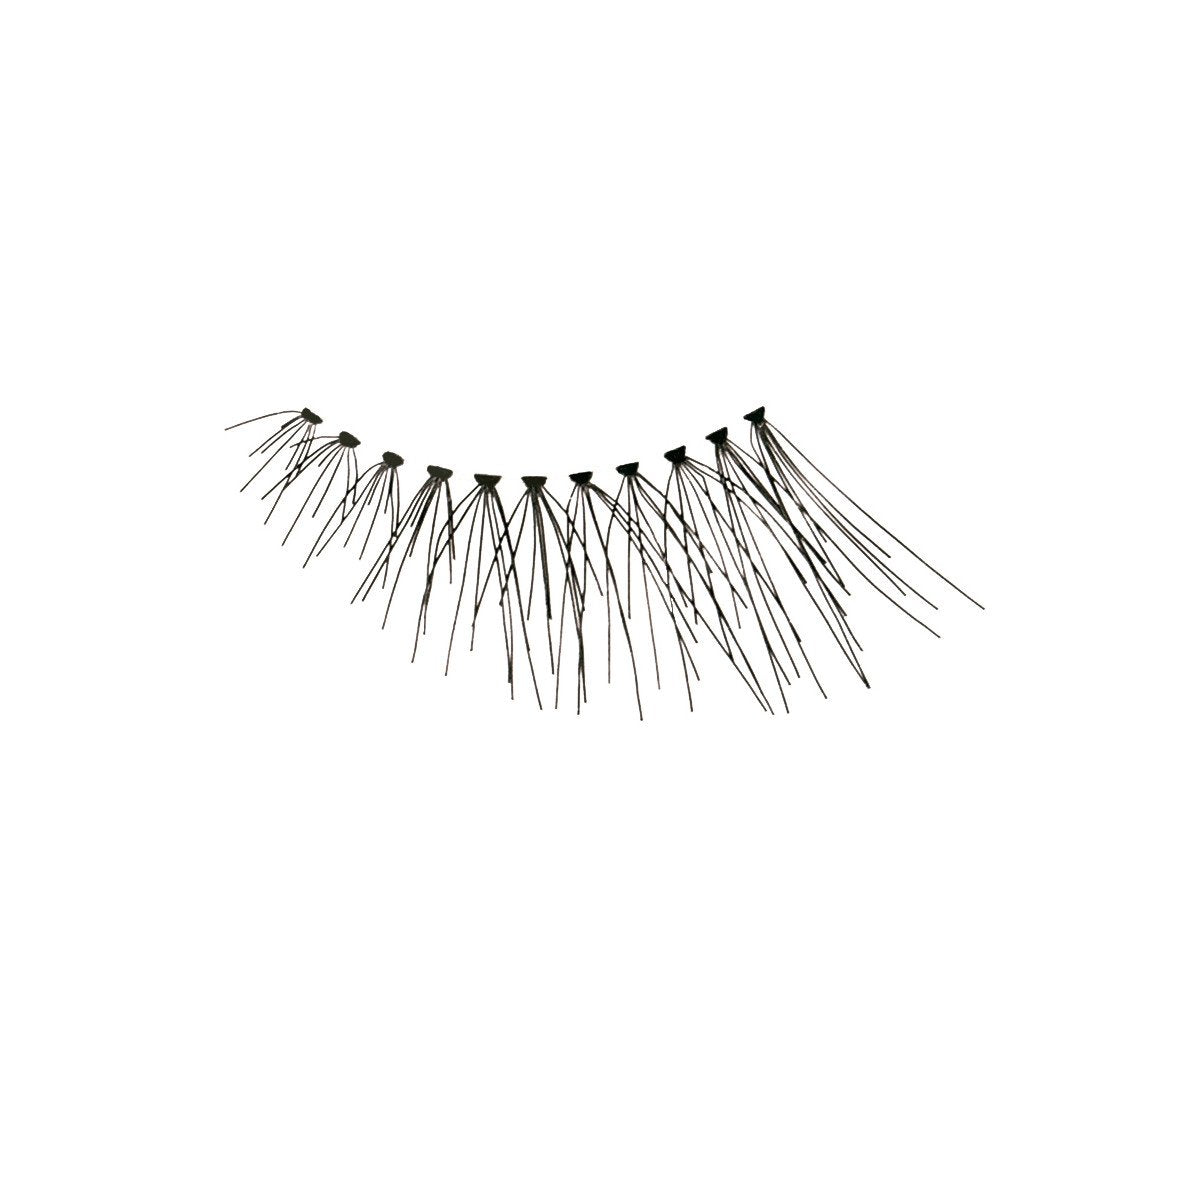 Red Cherry lashes - DS03 Jane